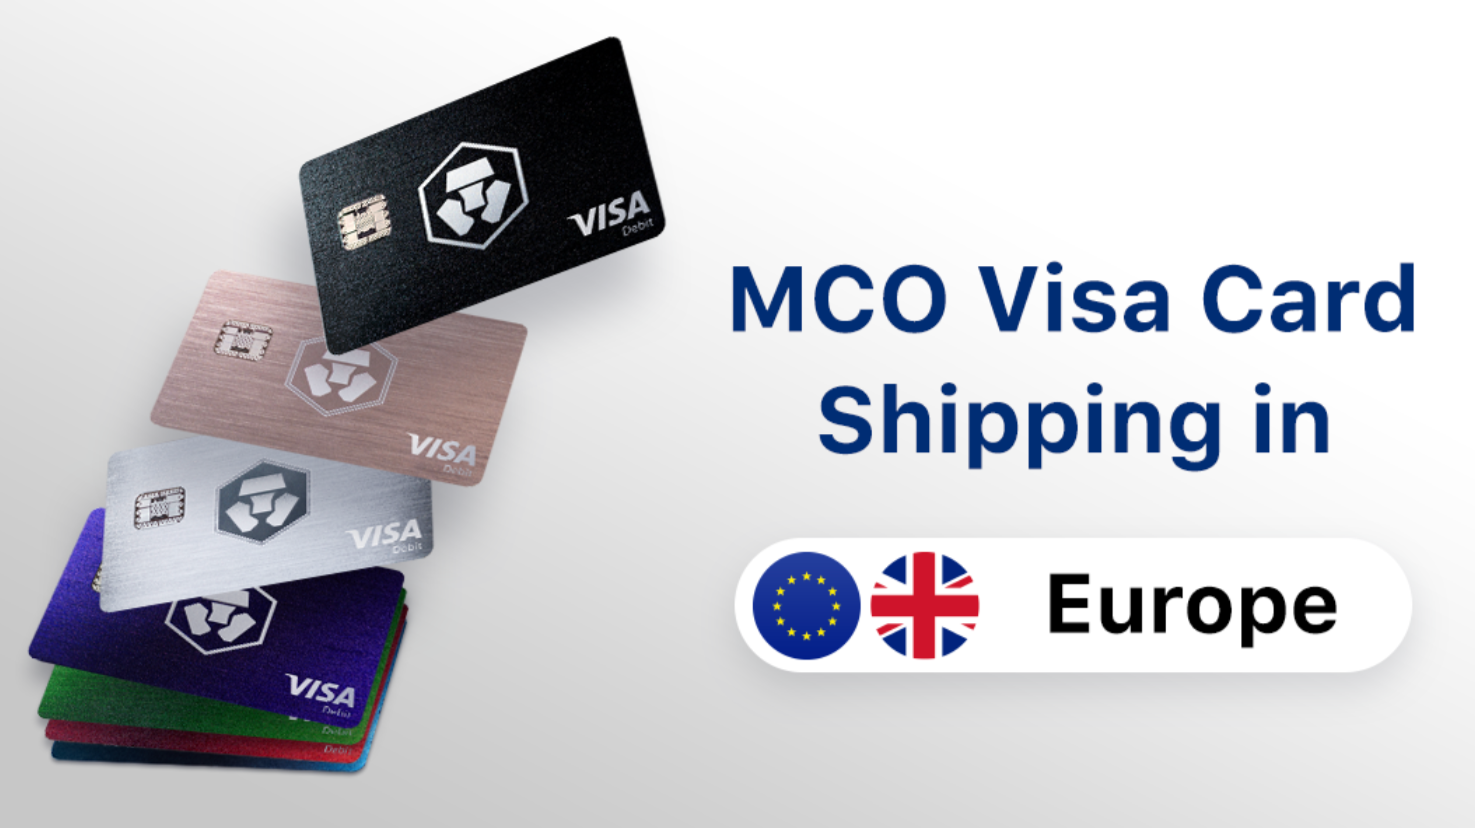 MCO Visa Card Review: Pros and Cons, Fees - ReadBTC